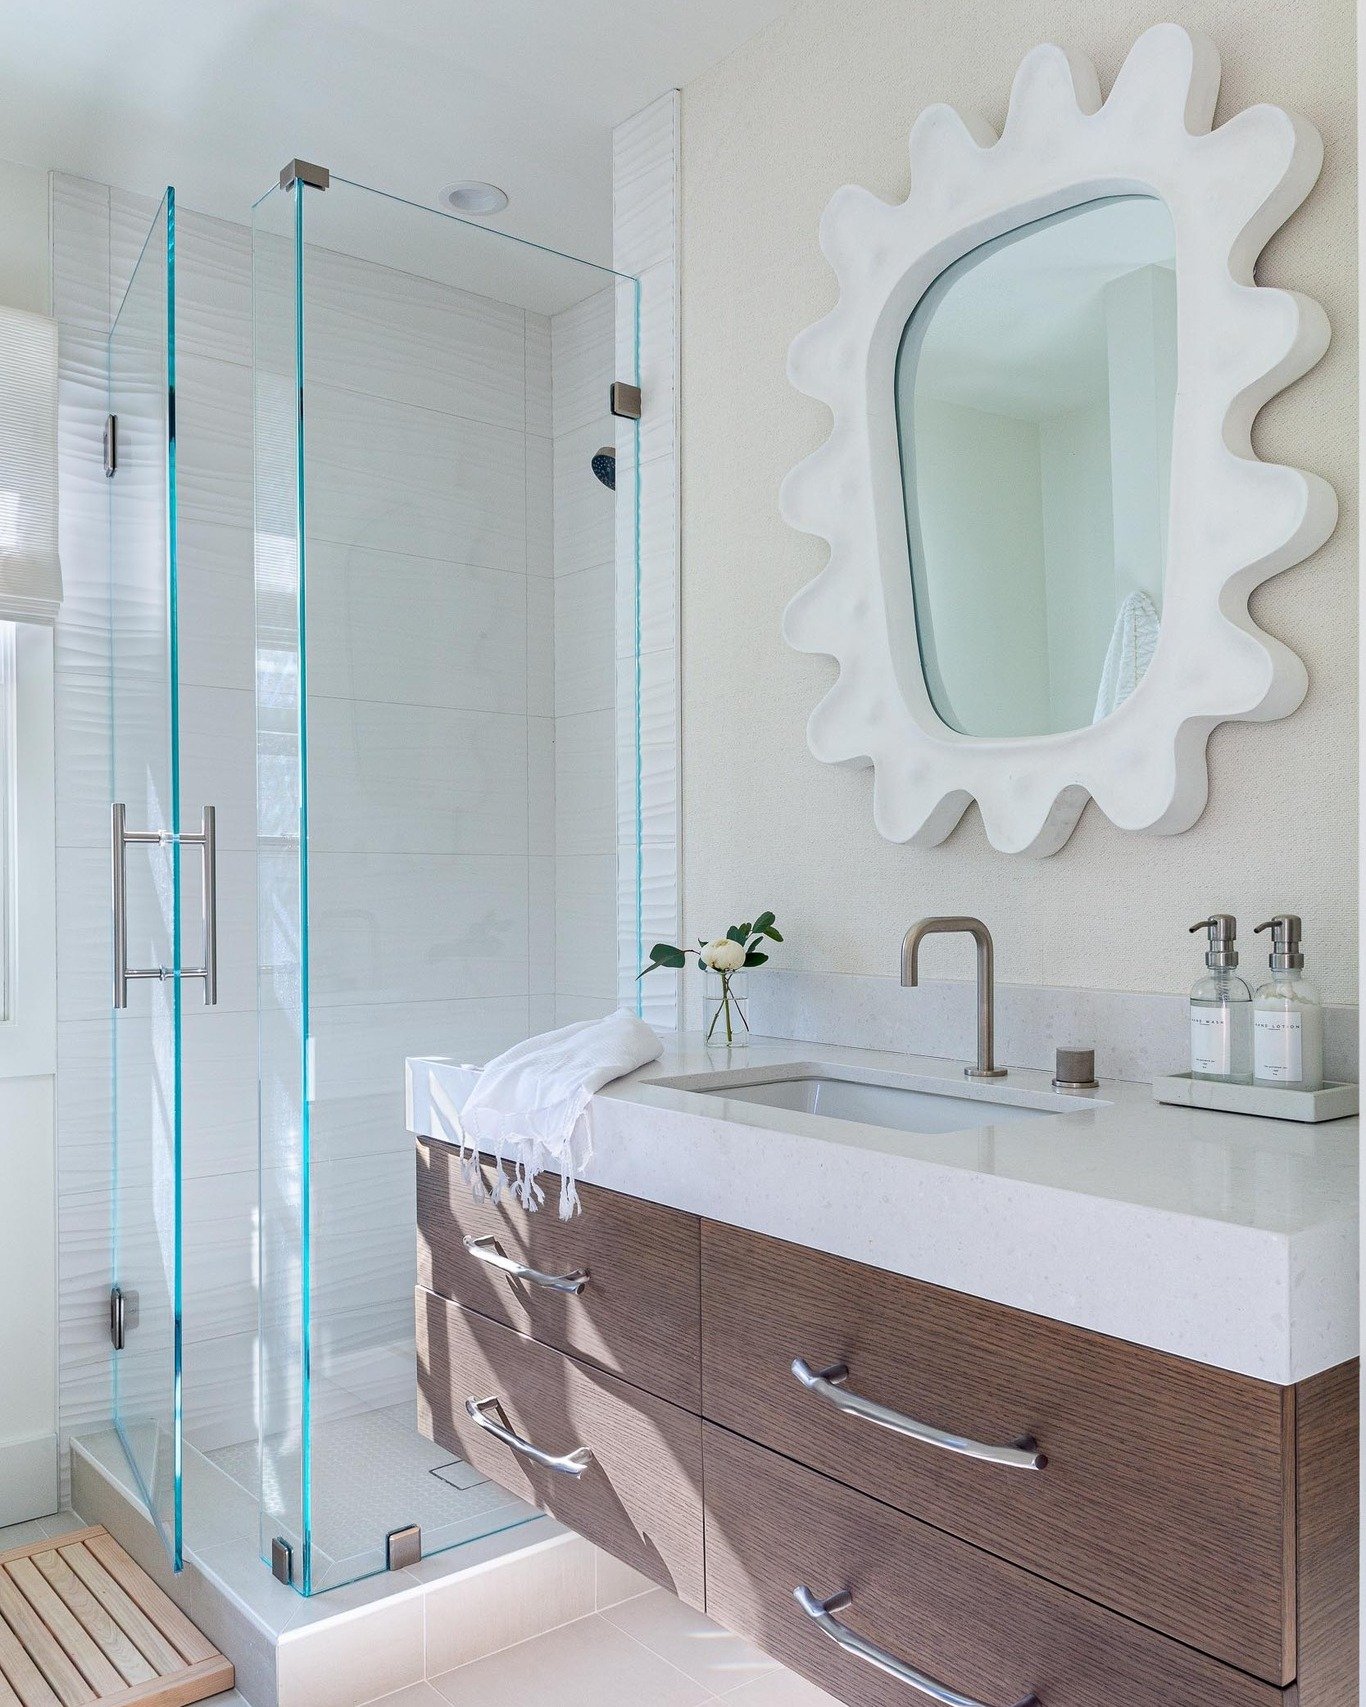 Pool house bathroom with a touch of fun | design by @kimberleyharrisoninteriors 
#interiordesignphotography #interiordesignphotographer #bayareainteriordesign #bayareainteriordesigner #sfinteriordesign #sfinteriordesigner #bathroominteriordesign #int